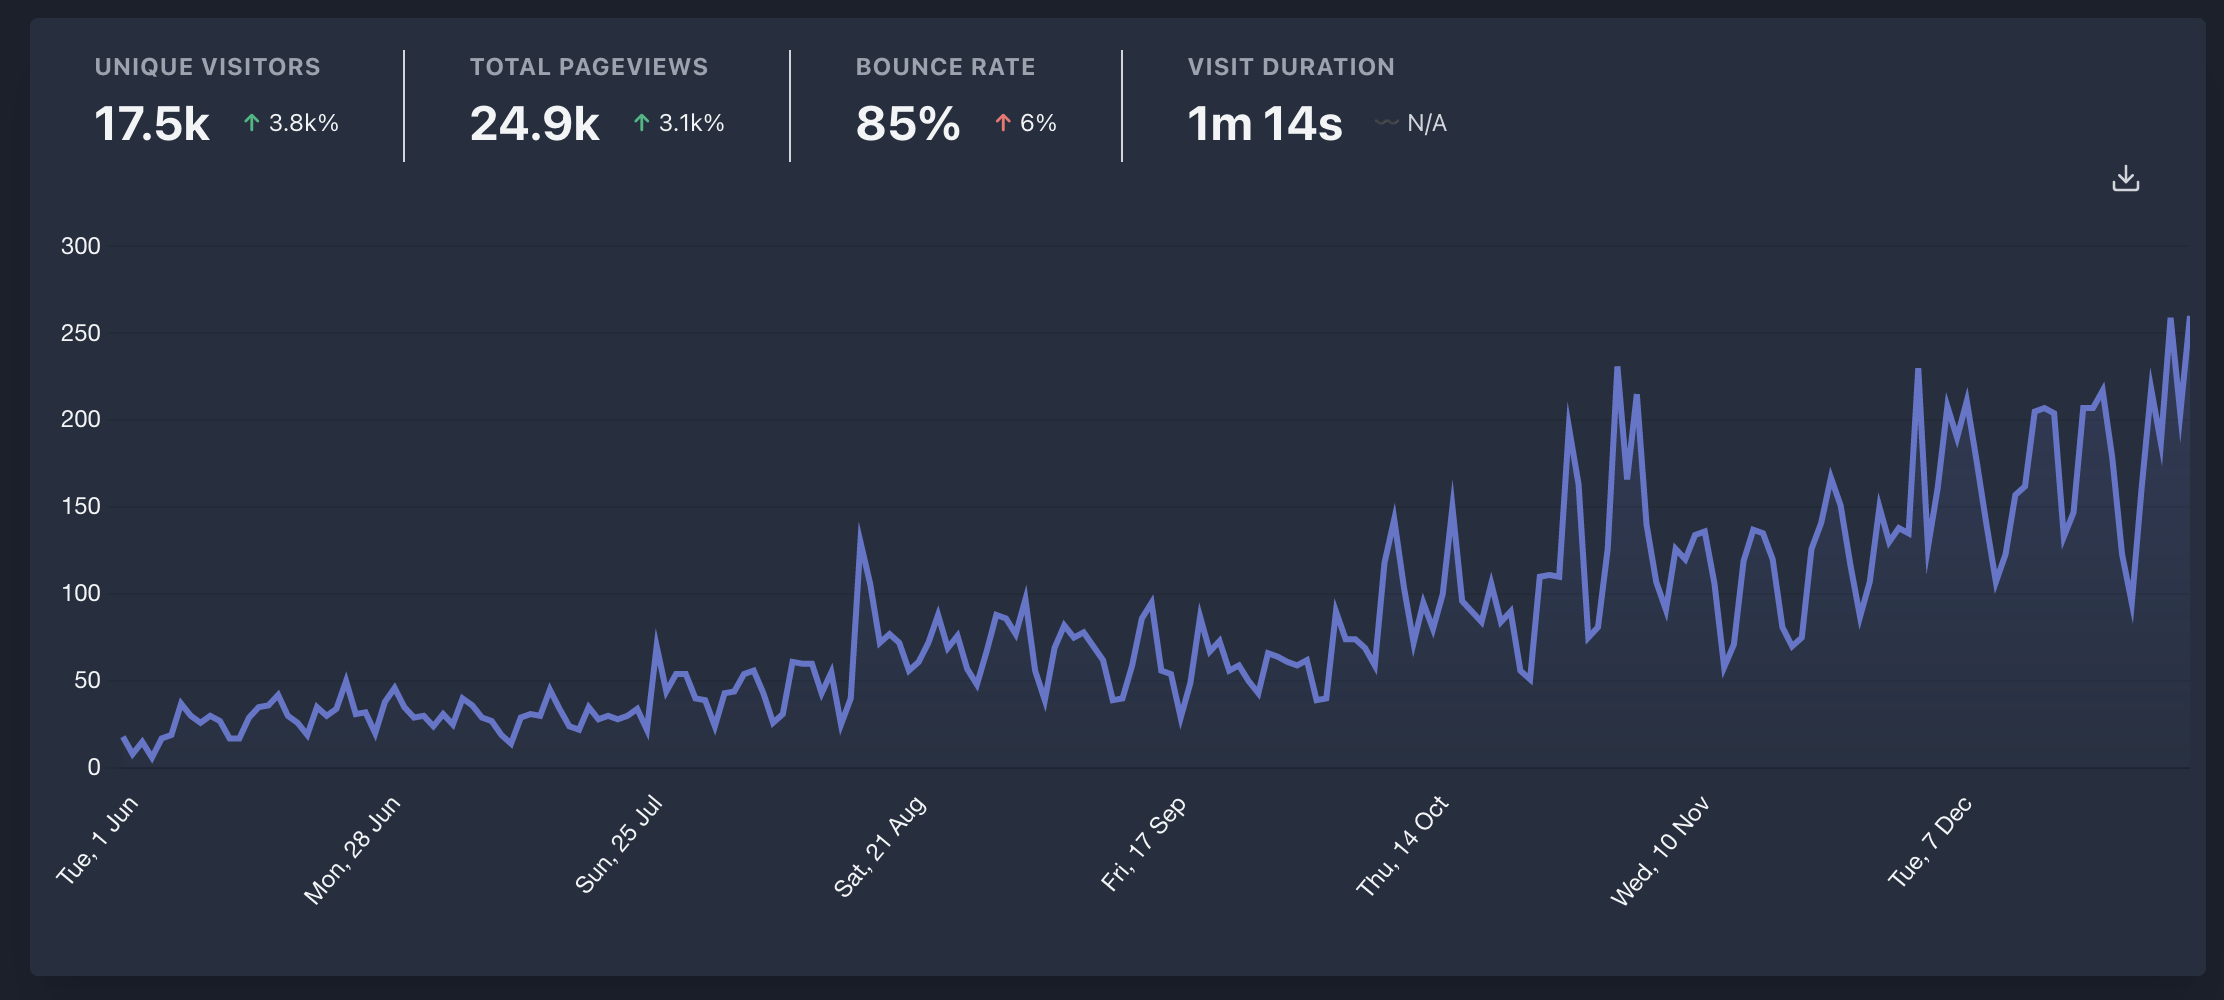 Plausible analytics screenshot showing visitor growth from June 1 to December 31